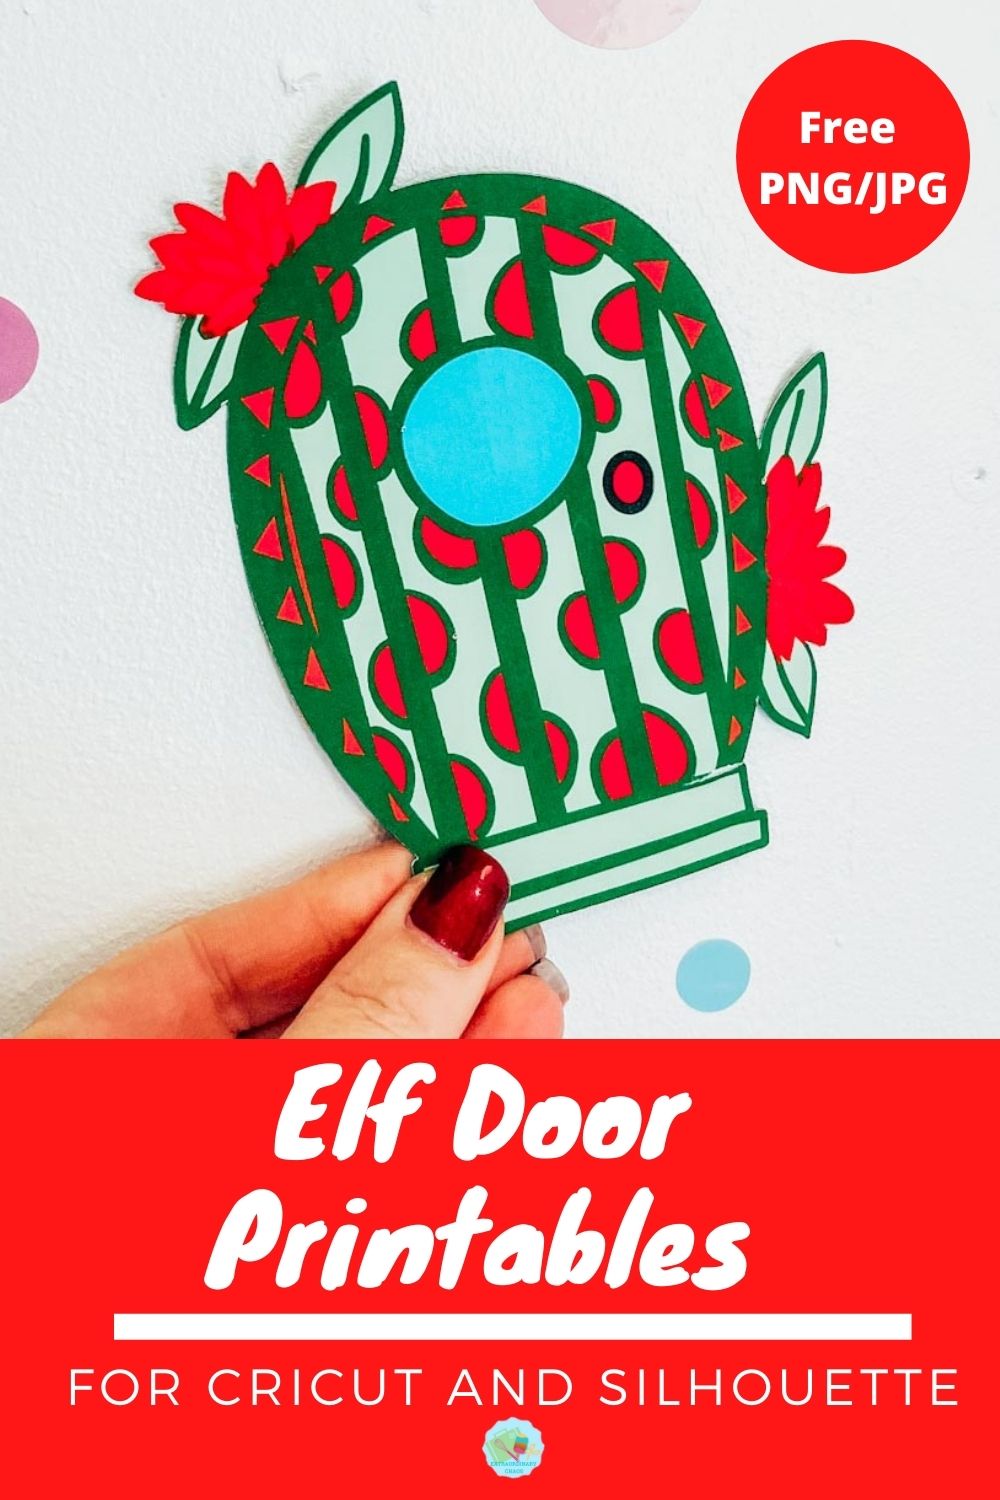 Free Elf door printables to print and cut with Cricut or silhouette -2